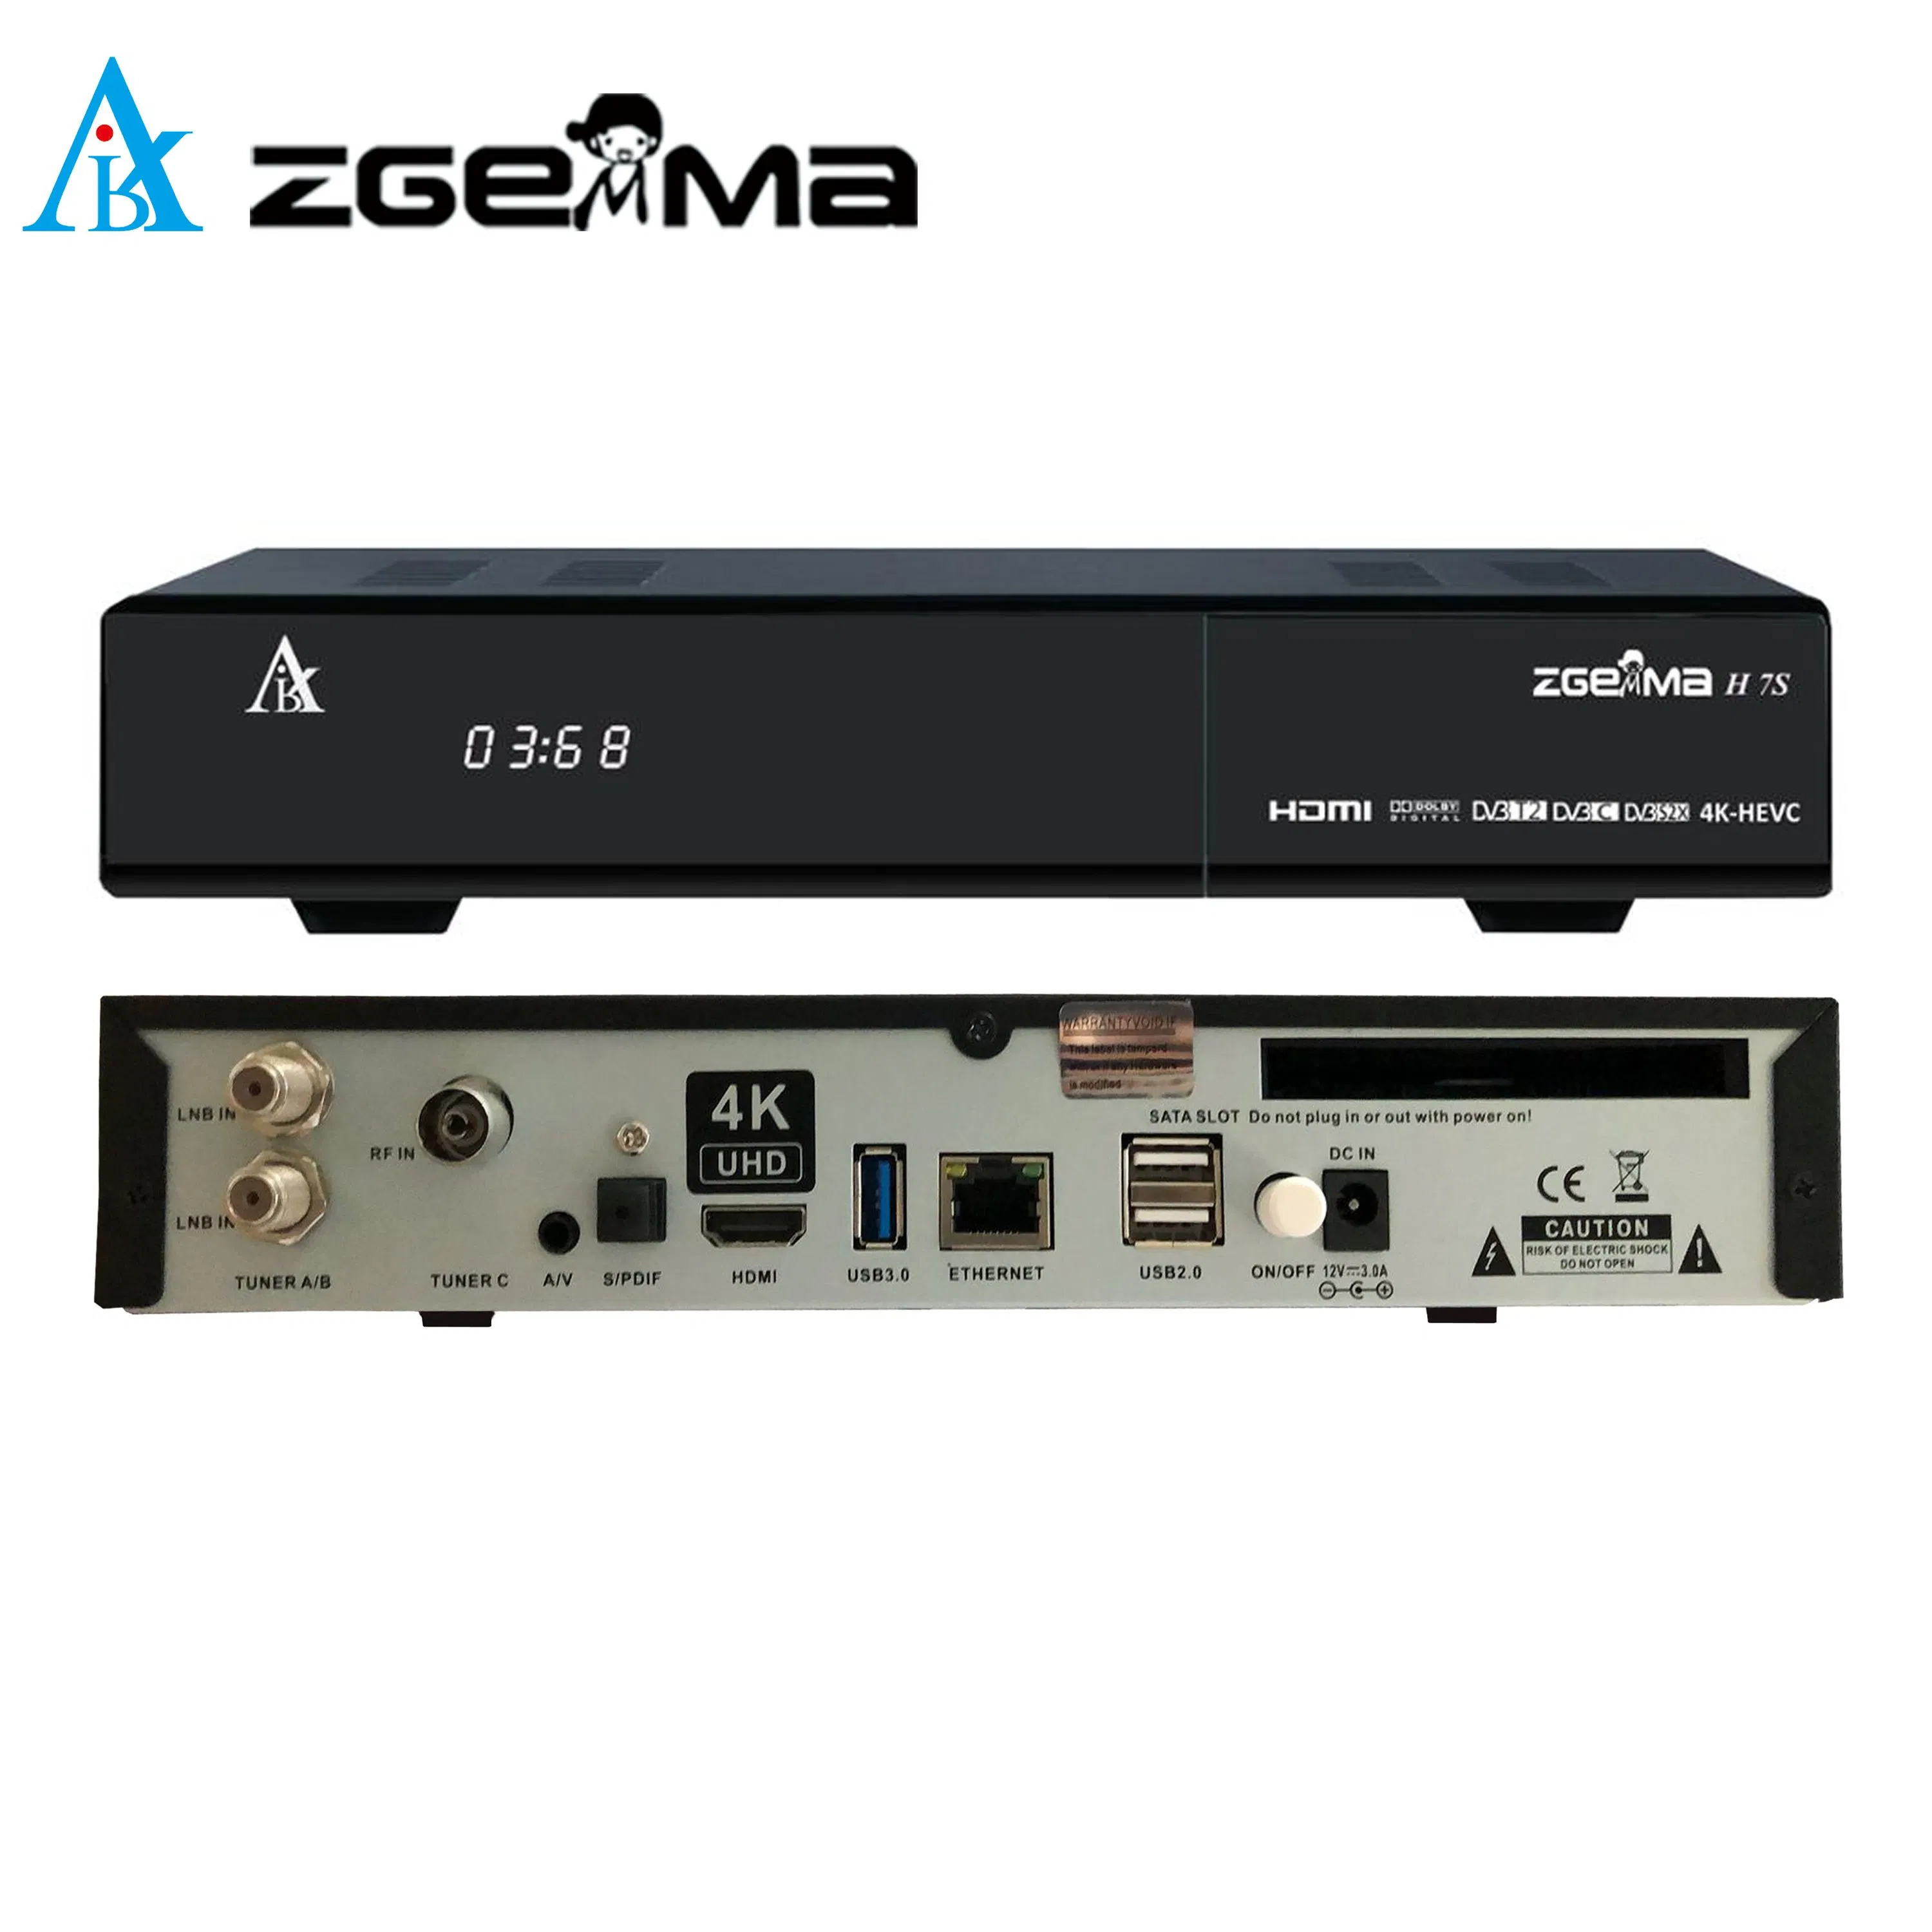 Enhance Your TV Entertainment with Zgemma H7s - 16GB Emmc Flash, 1GB DDR3 Memory Satellite TV Receiver